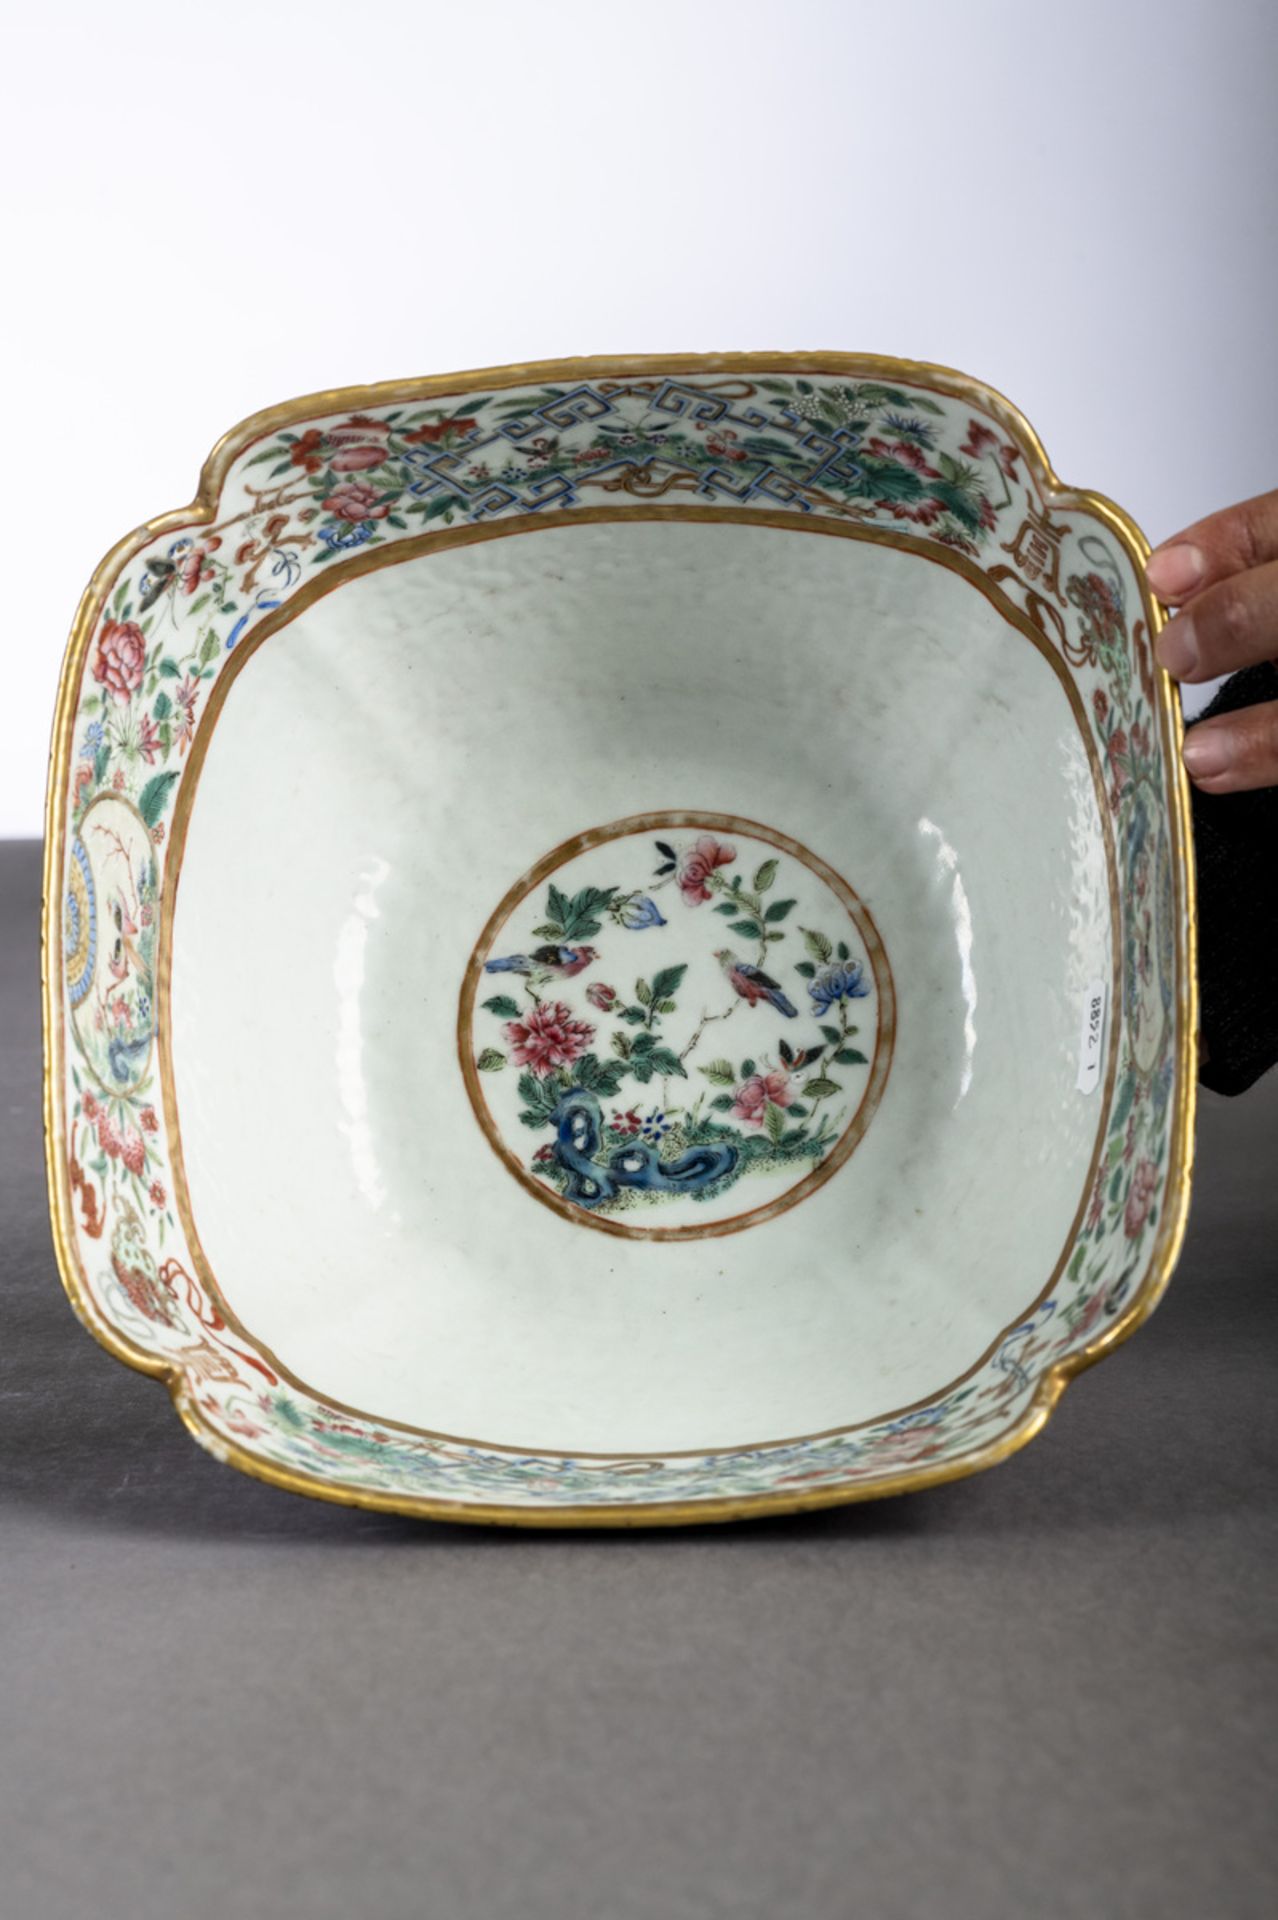 Lobed bowl in Chinese famille rose porcelain with gold rims 'characters', 19th century (11x24x24cm) - Image 5 of 5